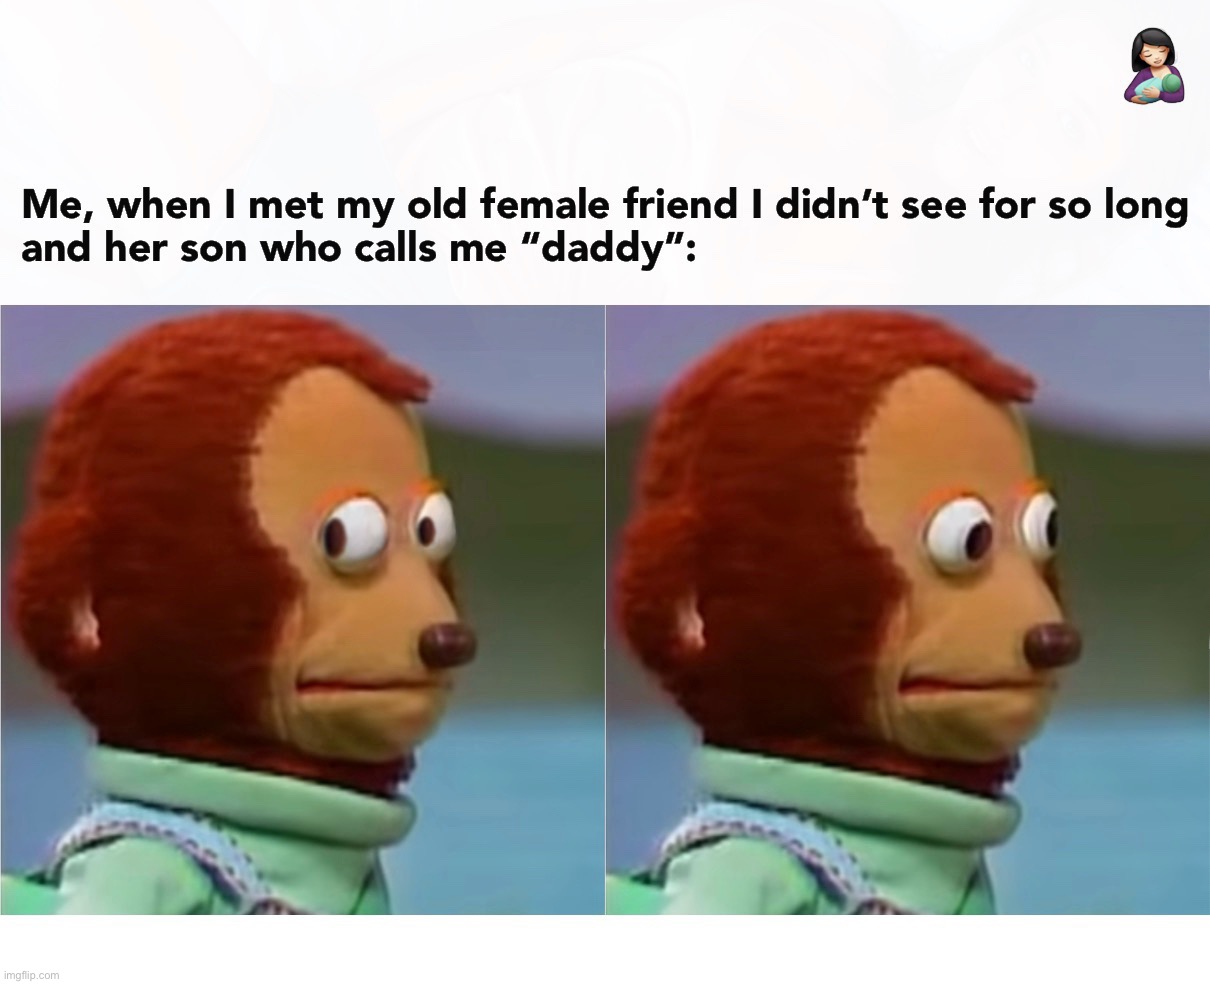 My old friend! | Me, when I met my old female friend 🤱🏻 I didn’t see for so long and her son who calls me “daddy”. 👨‍👩‍👦 | image tagged in my old friend,female friend,best friends,love and friendship,friendship ended,parenting | made w/ Imgflip meme maker